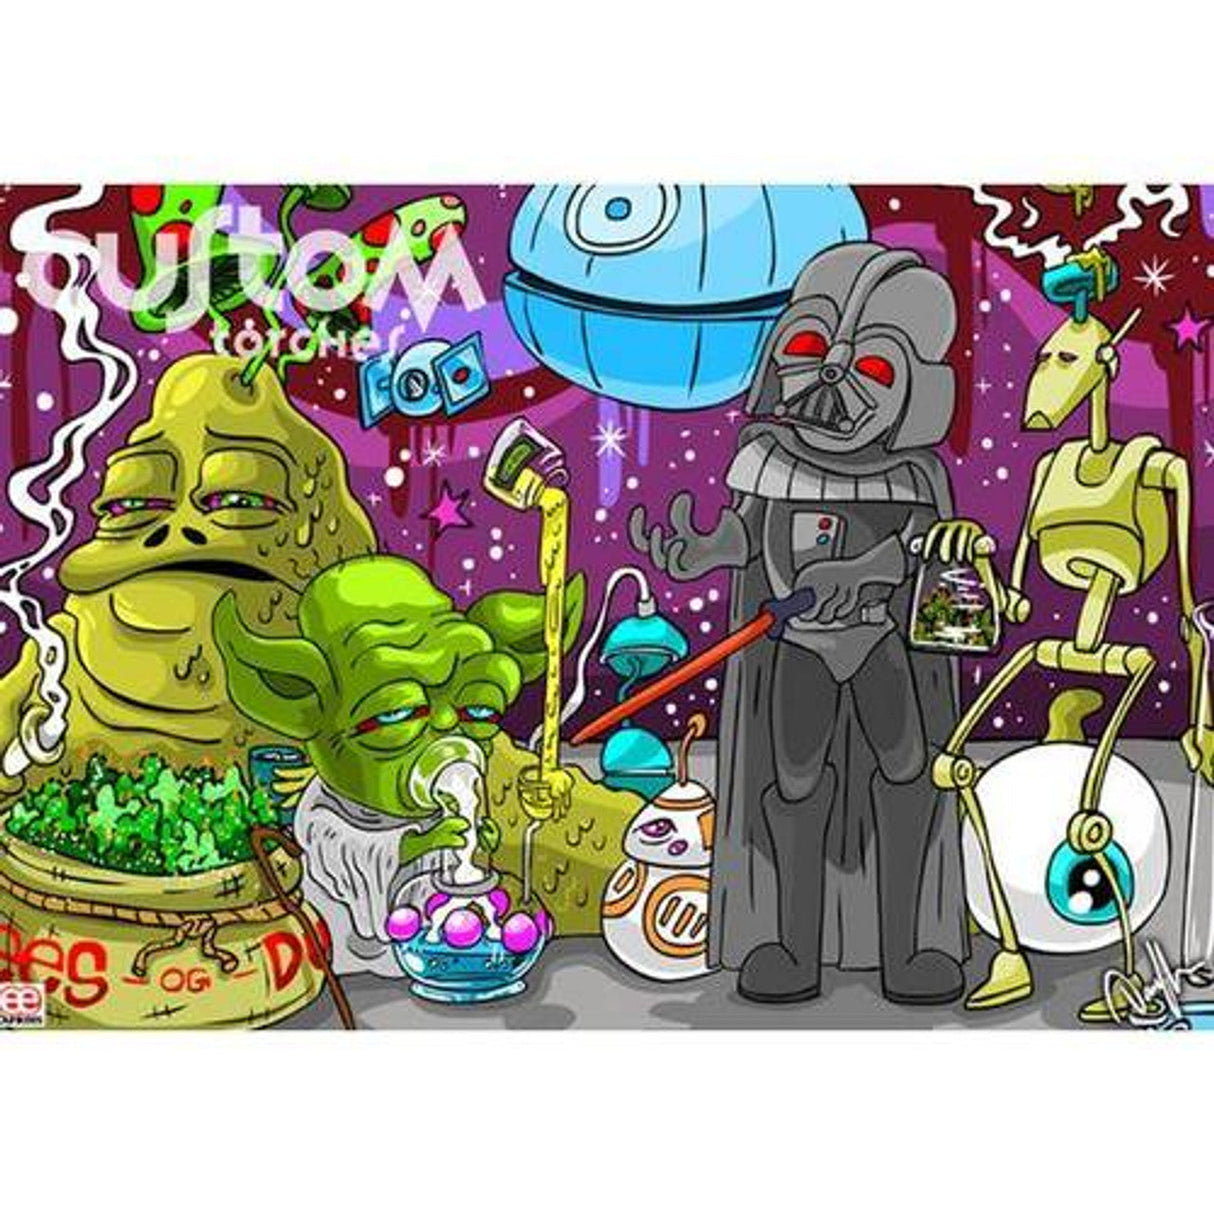 Dunkees Custom 6" Torch - Dab Wars themed artwork with vibrant characters and colors